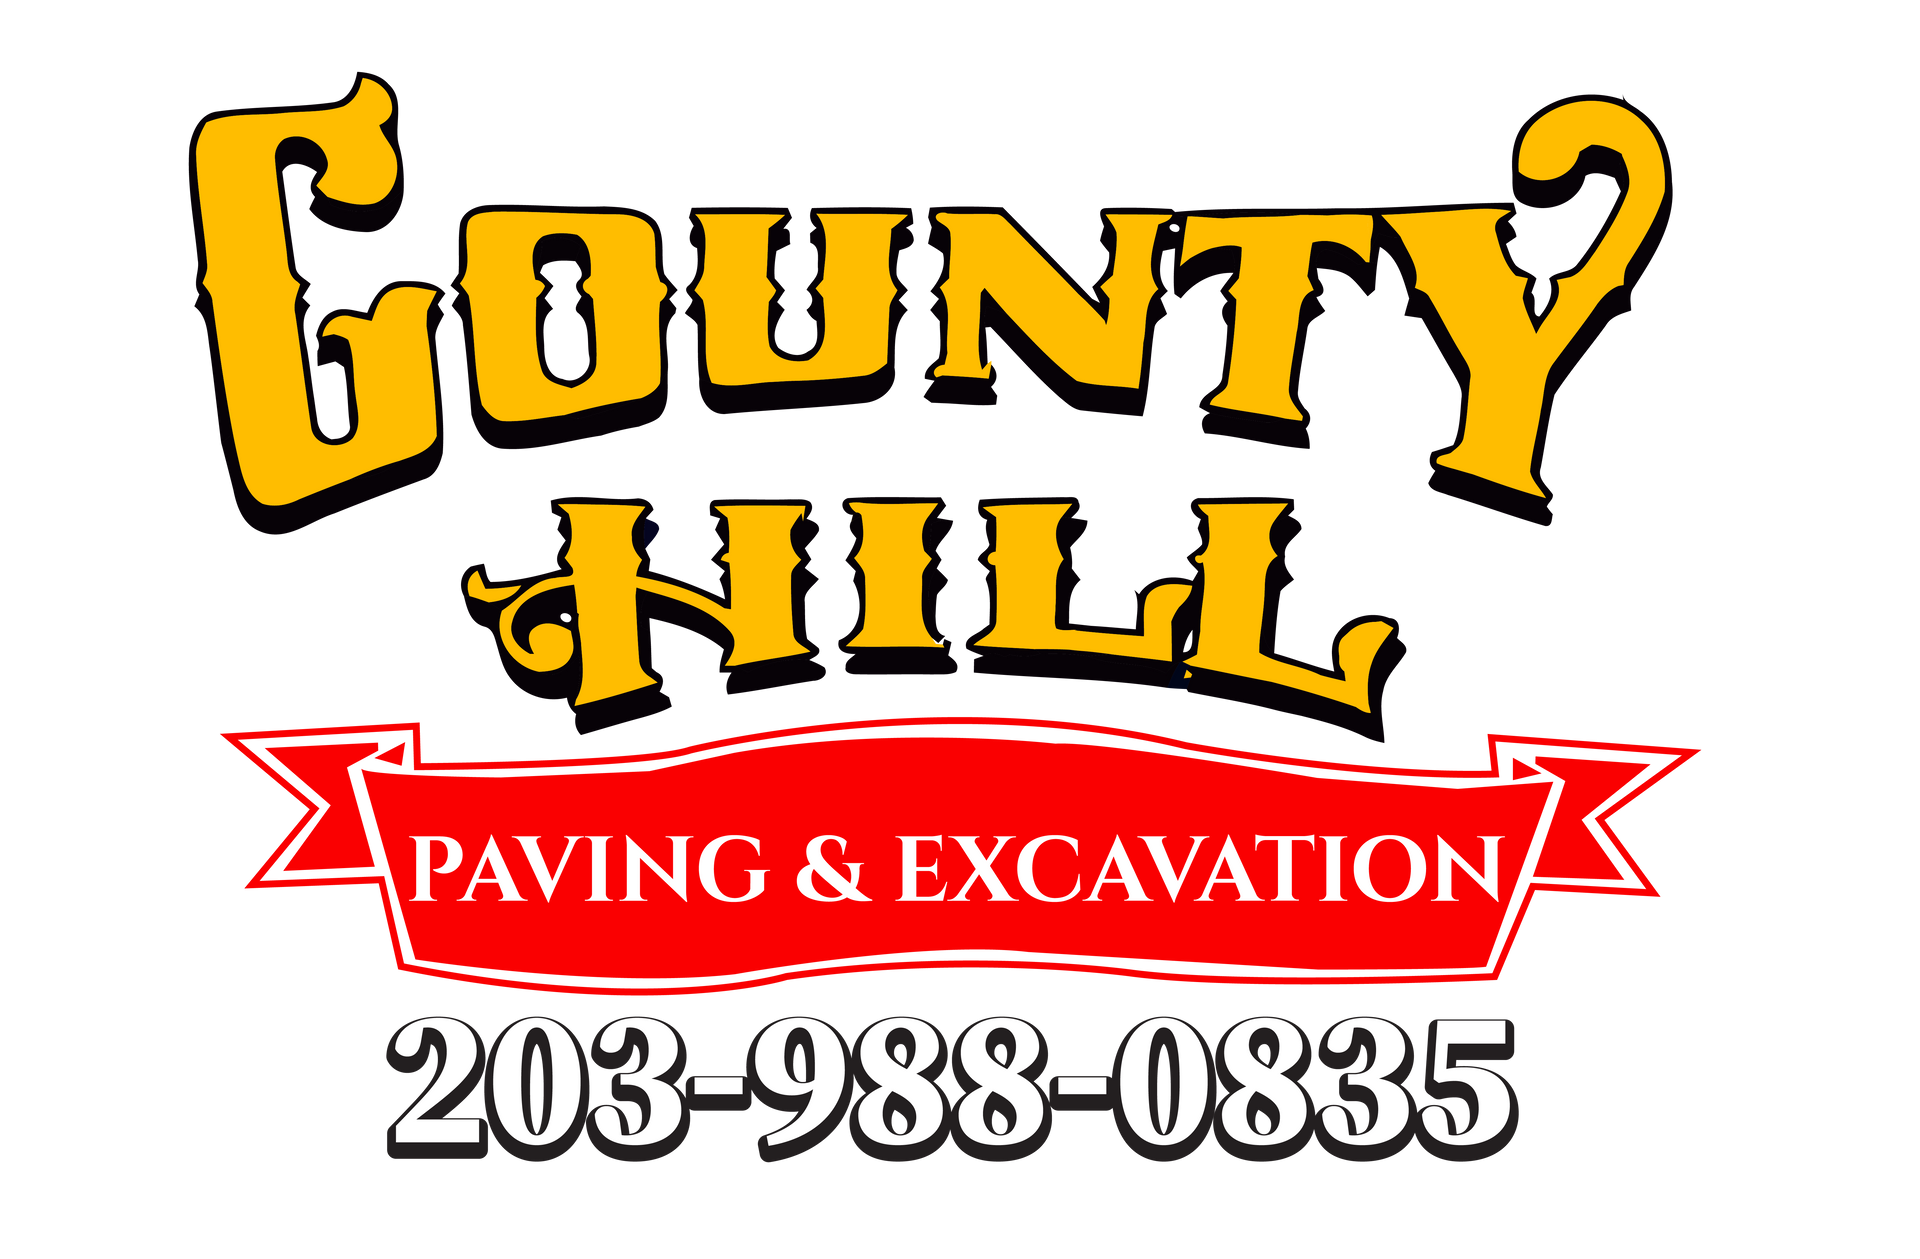 County Hill Paving & Excavation 